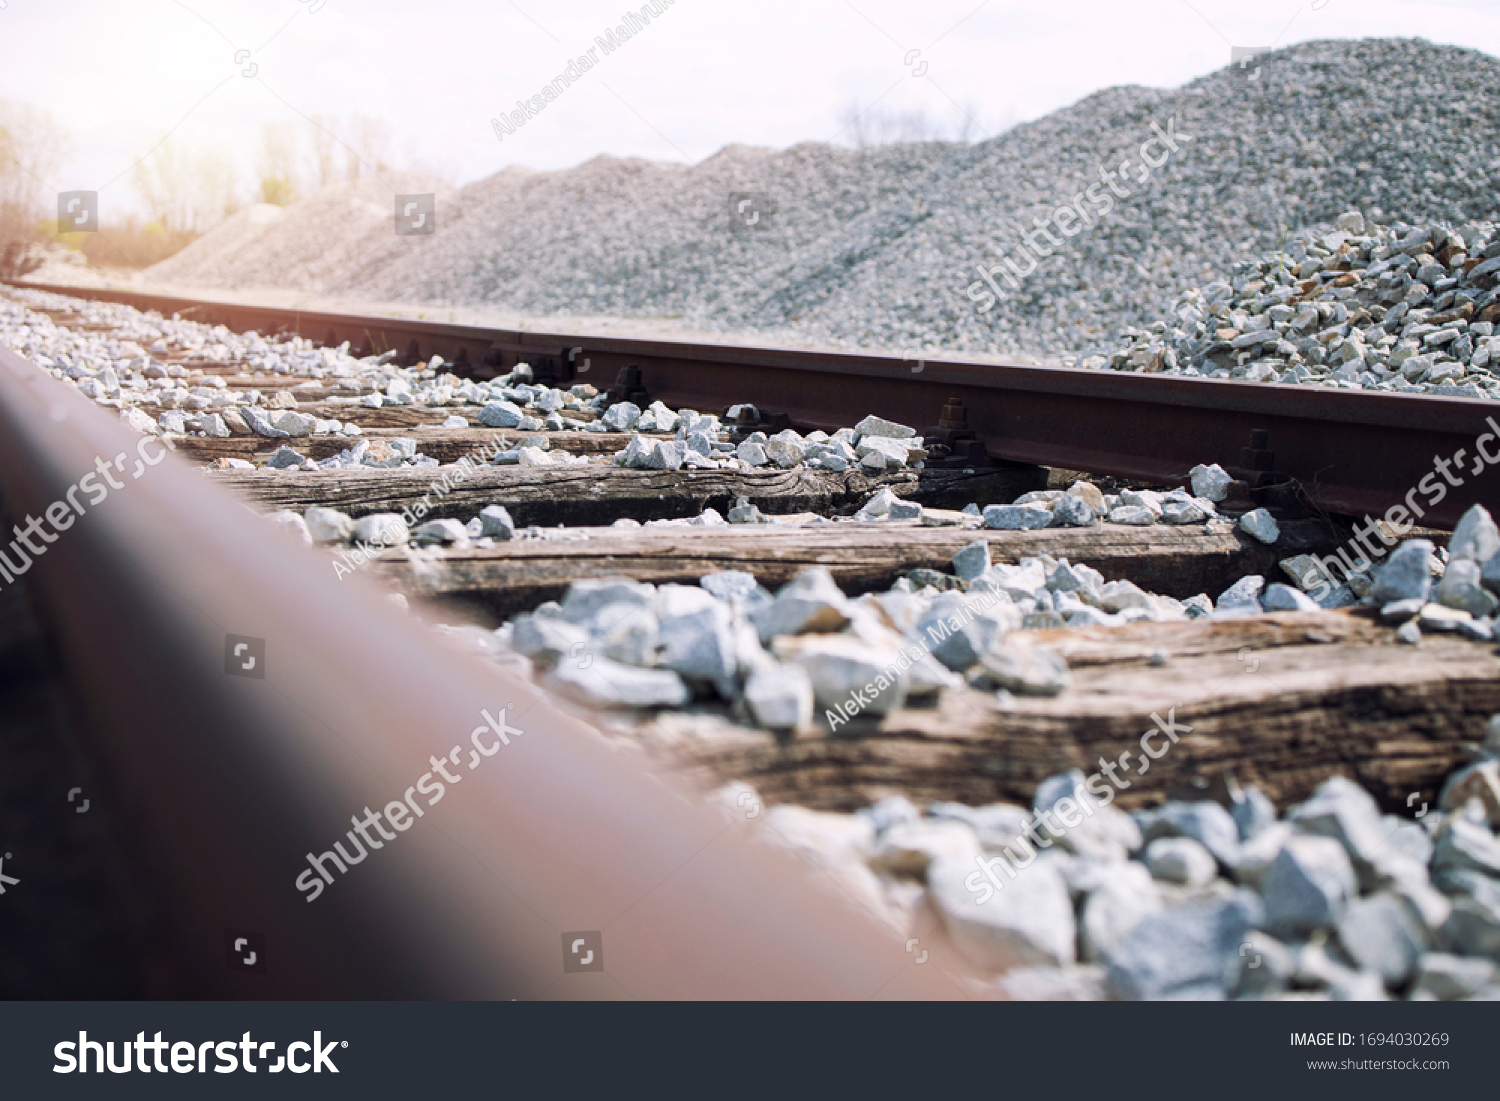 Railroad construction site. Railway tracks with wooden rail ties and ballast. In background large pile of ballast rocks used for building railroads. #1694030269